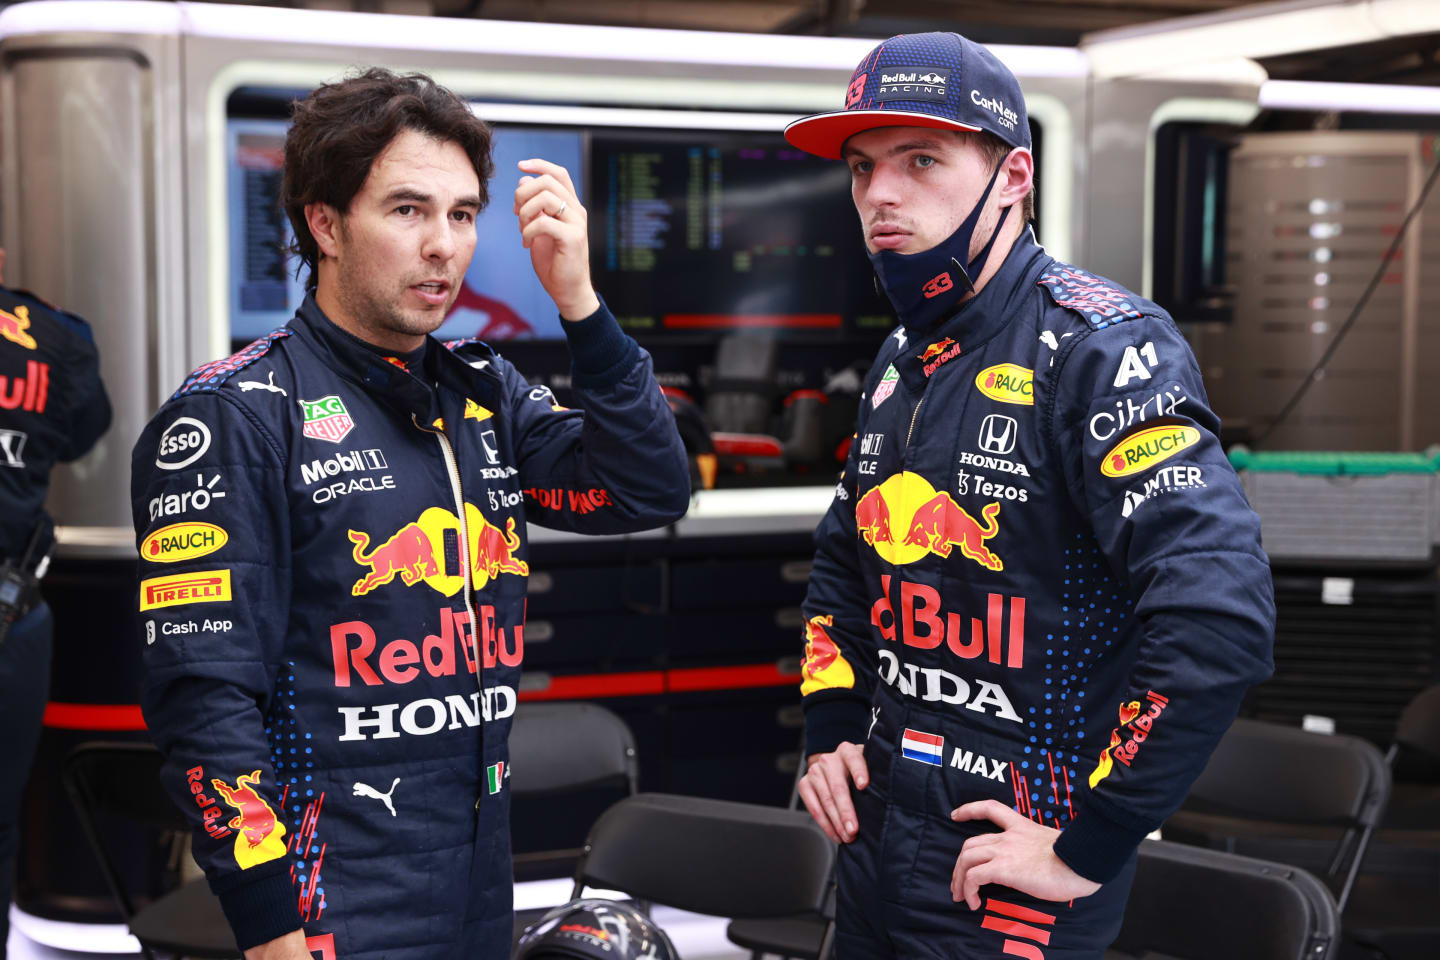 BUDAPEST, HUNGARY - AUGUST 01: Max Verstappen of Netherlands and Red Bull Racing and Sergio Perez